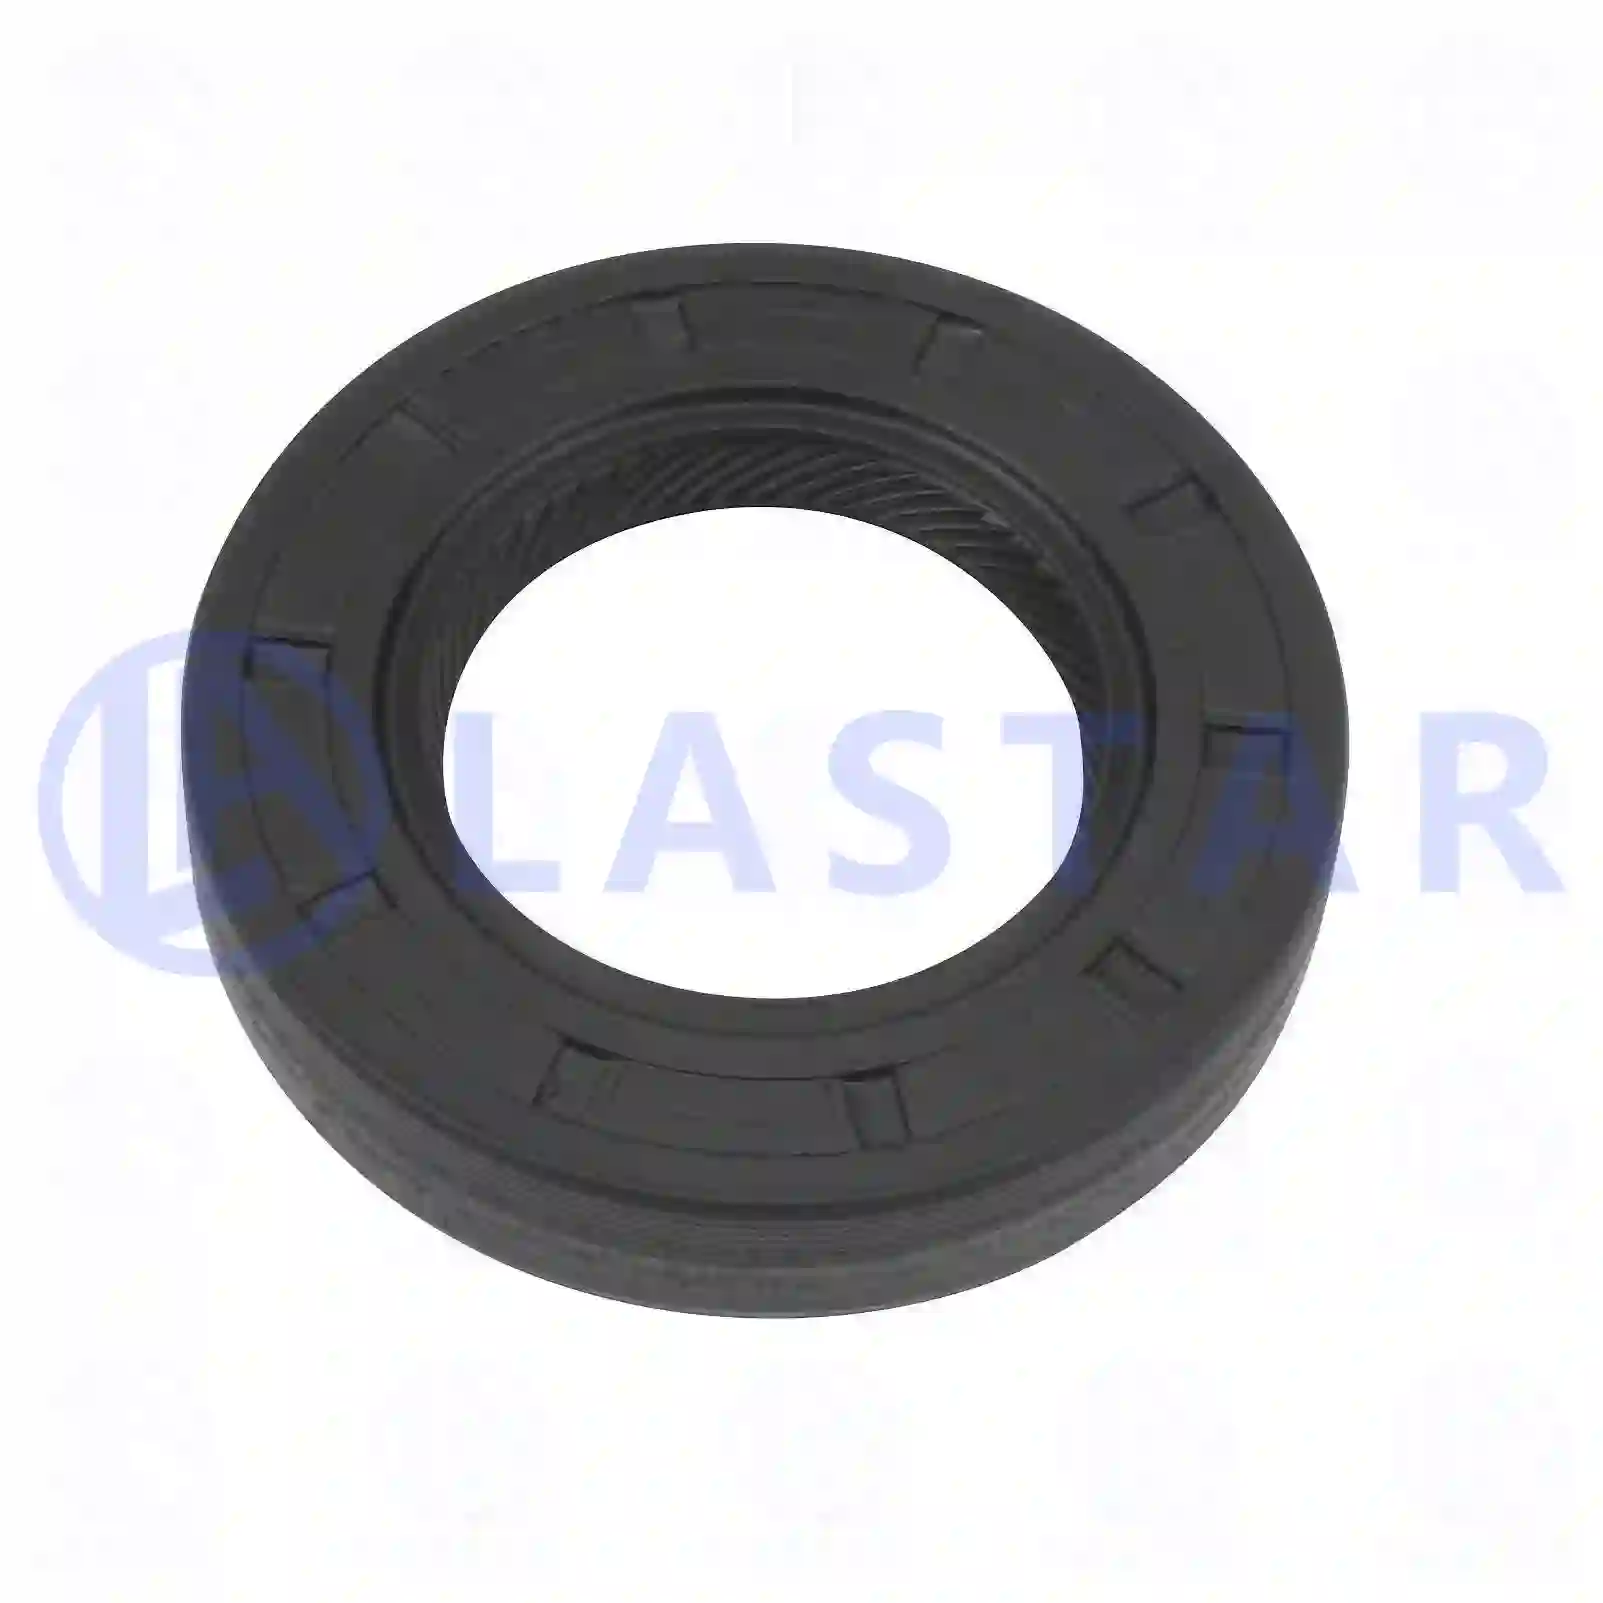 Oil seal, 77723639, 424580, 941580, ||  77723639 Lastar Spare Part | Truck Spare Parts, Auotomotive Spare Parts Oil seal, 77723639, 424580, 941580, ||  77723639 Lastar Spare Part | Truck Spare Parts, Auotomotive Spare Parts